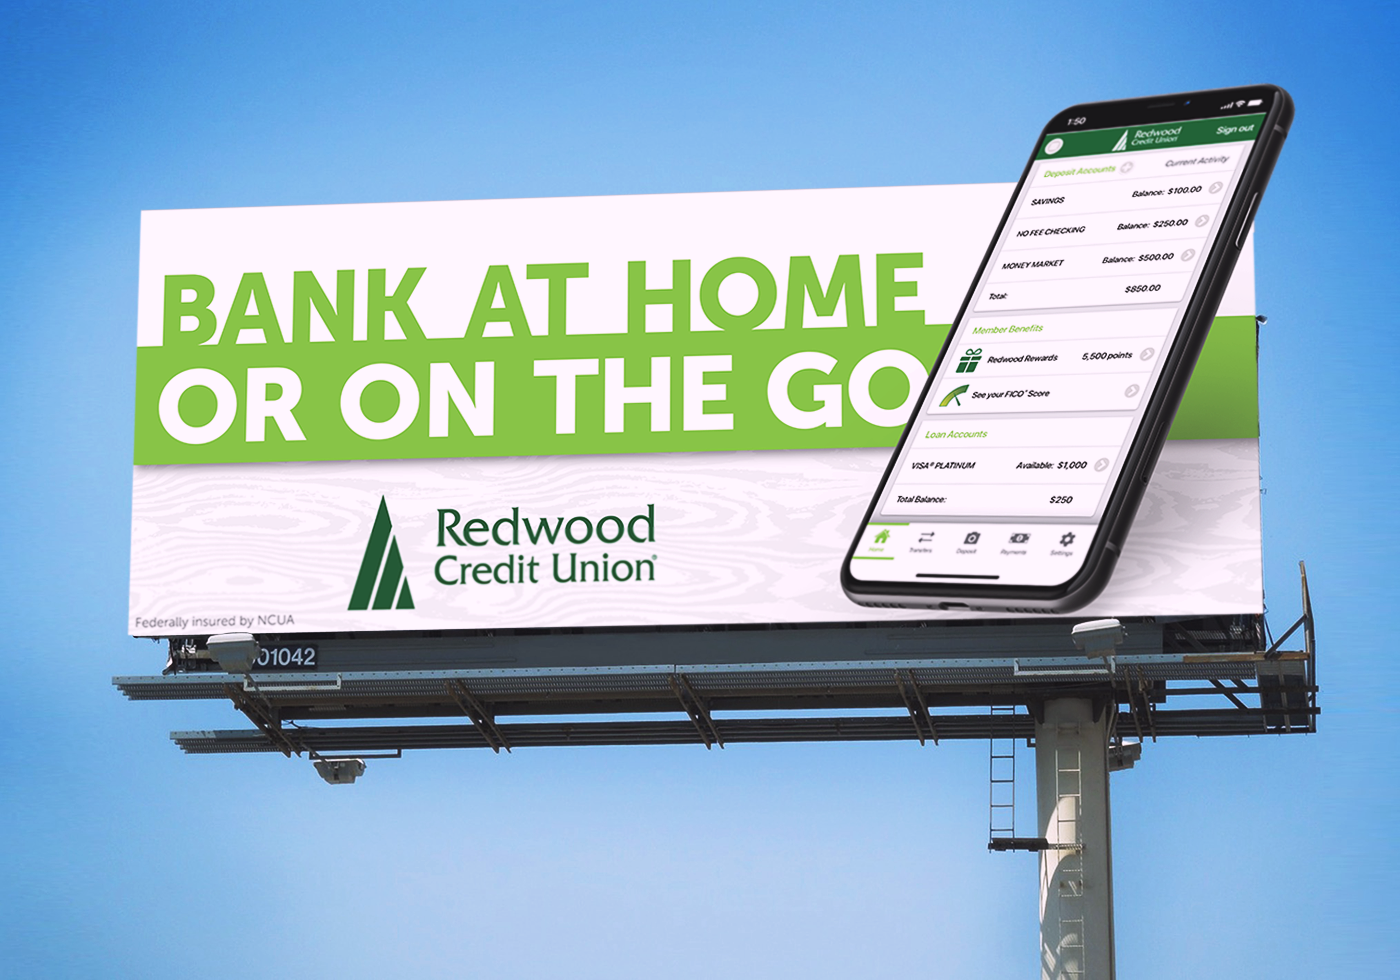 RCU’s “Bank at Home or On the Go” billboard